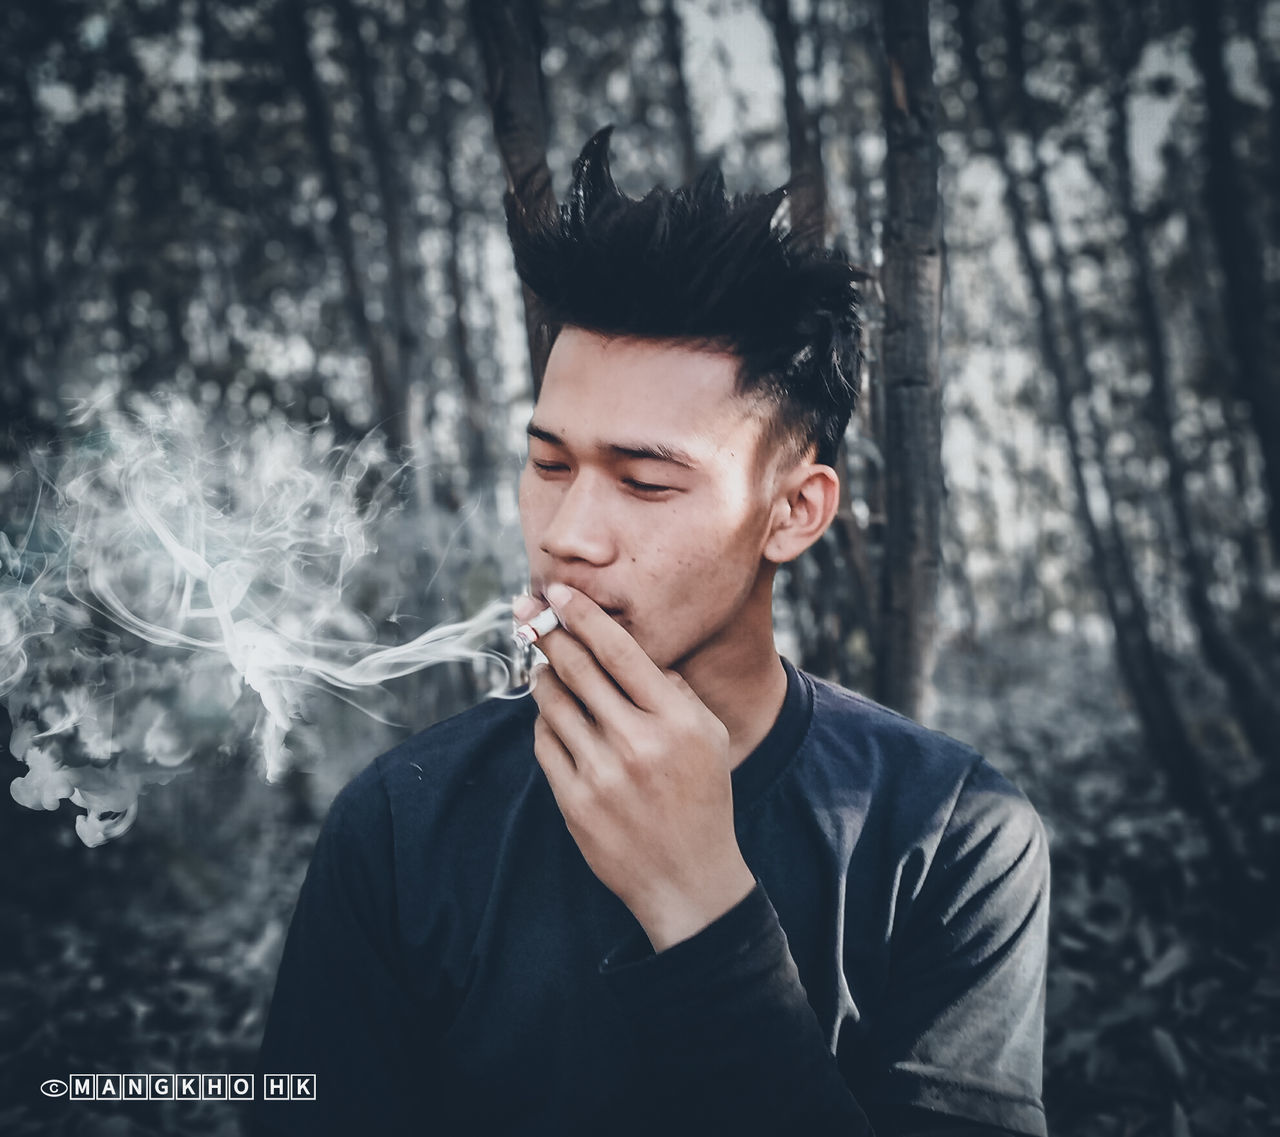 smoke - physical structure, one person, young adult, tree, smoking - activity, young men, real people, cigarette, smoking issues, bad habit, activity, headshot, forest, social issues, lifestyles, plant, risk, leisure activity, human face